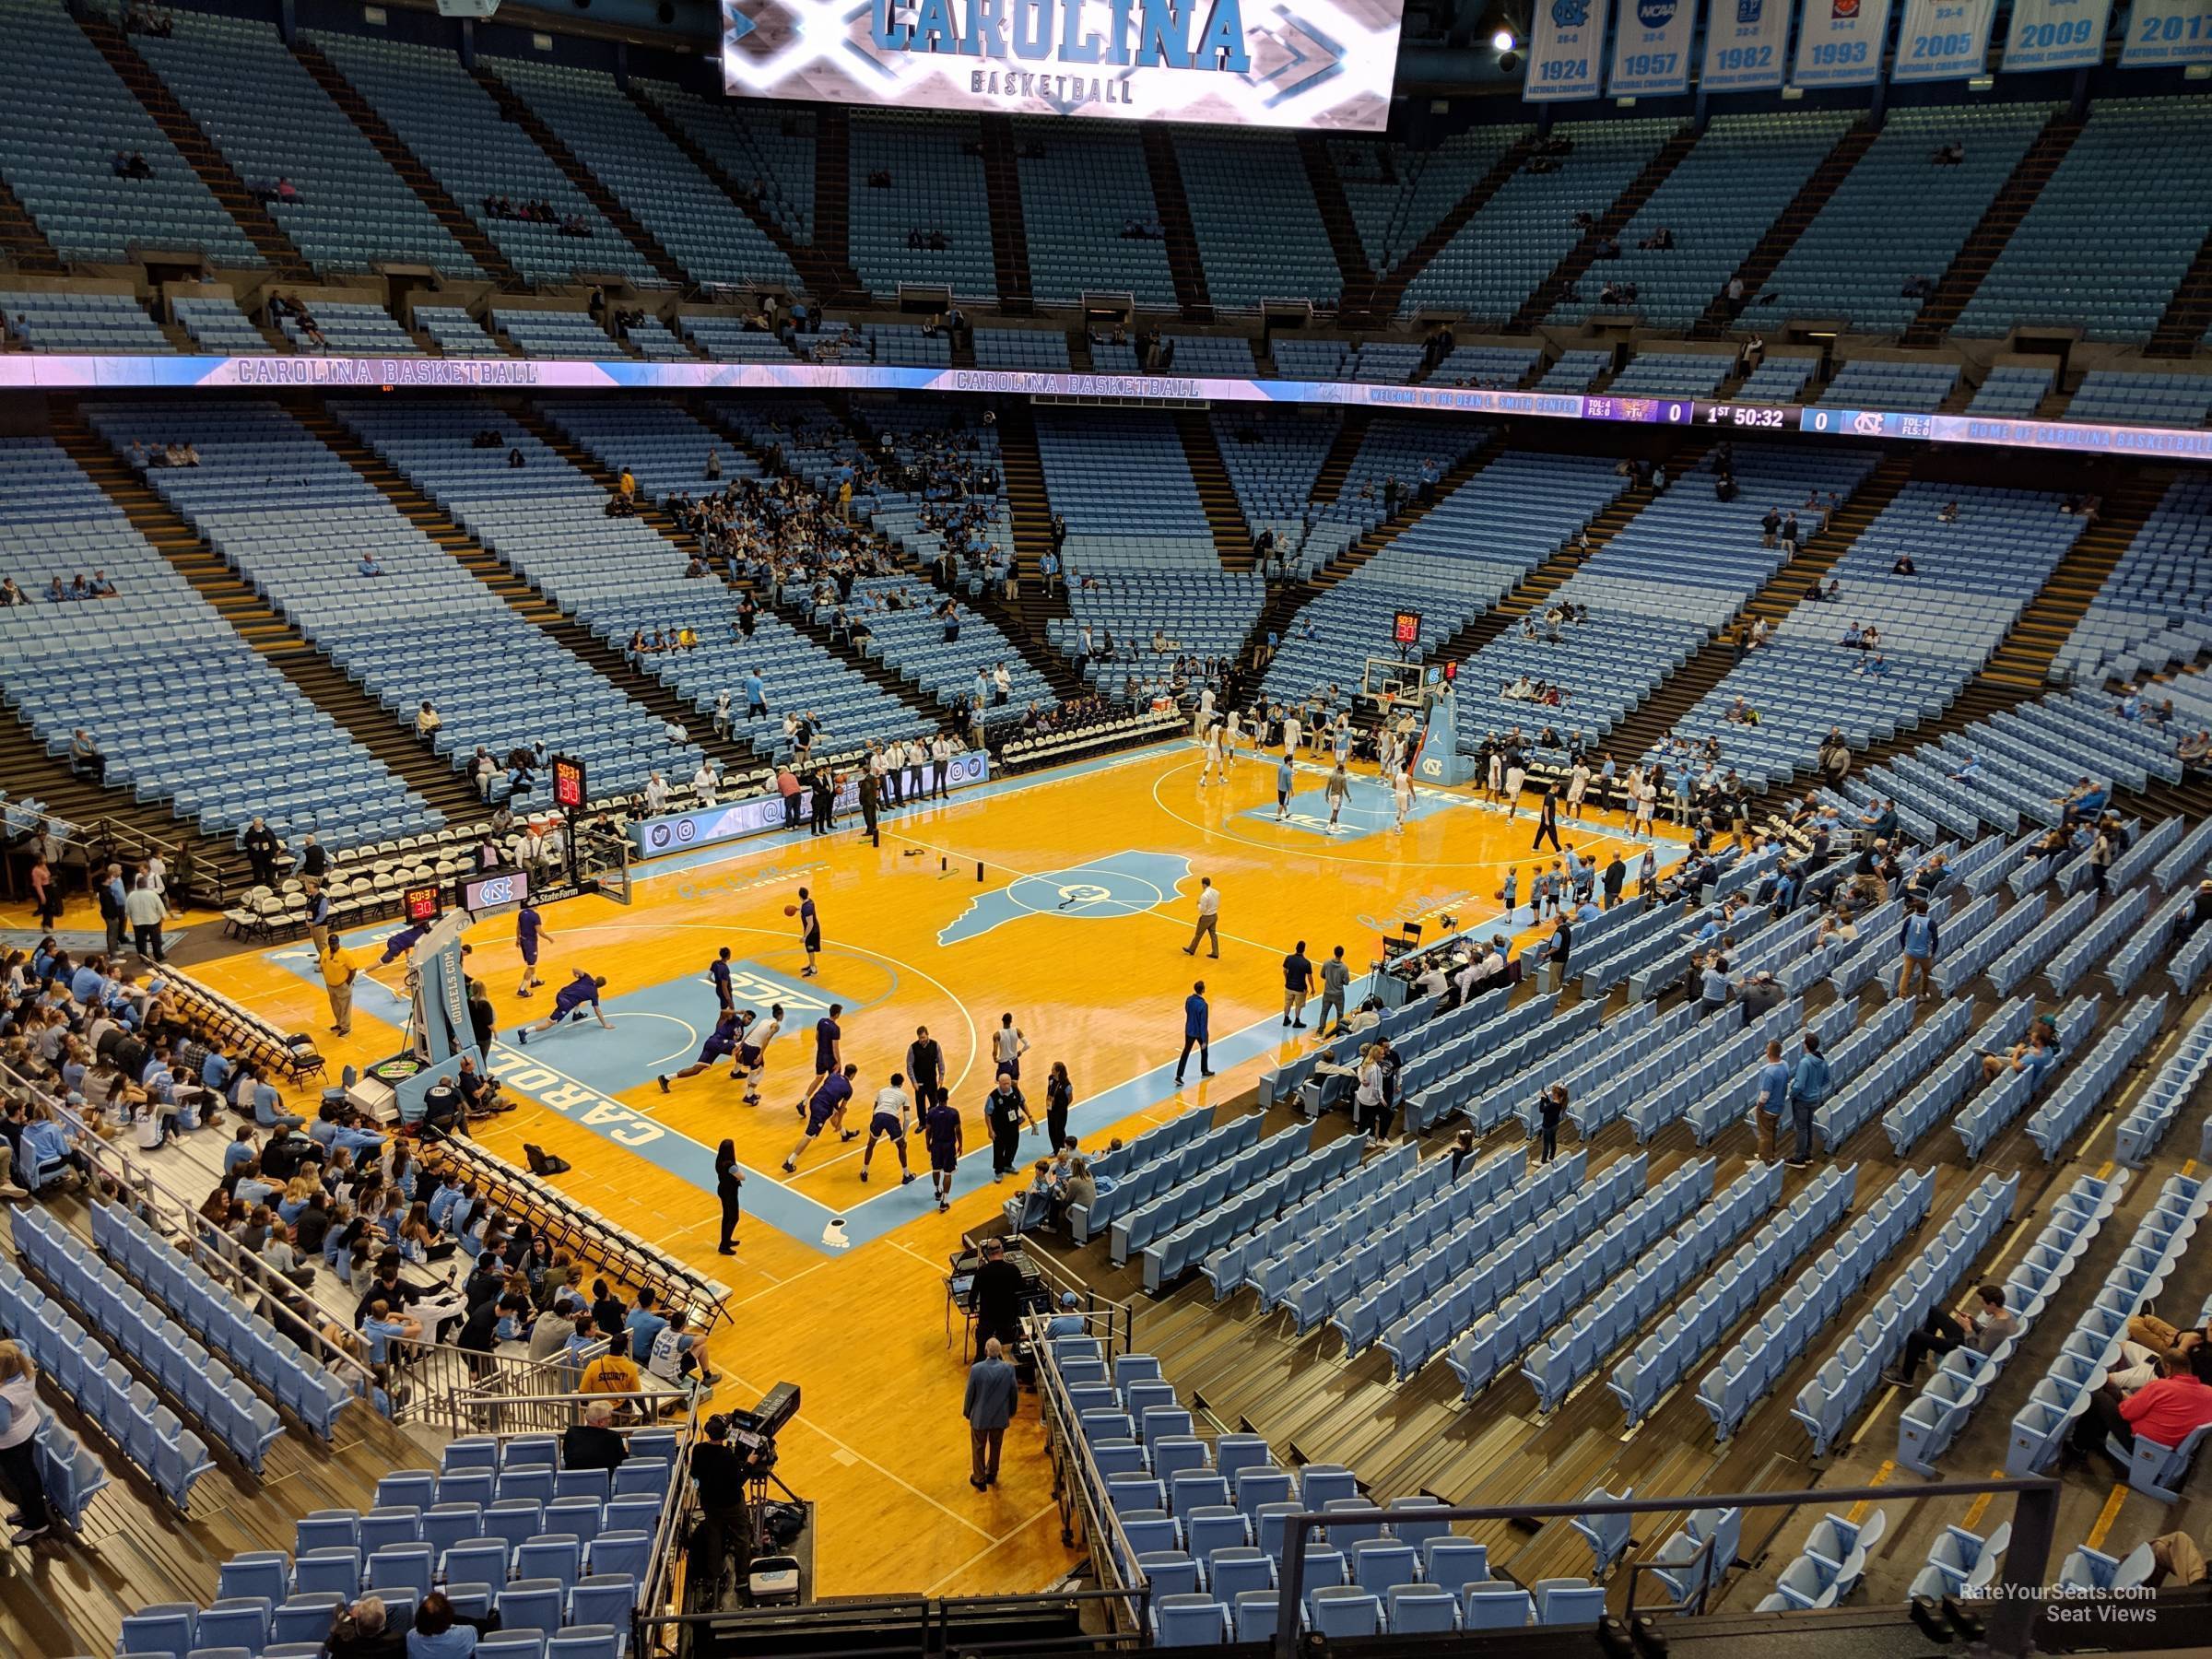 section 222, row c seat view  - dean smith center